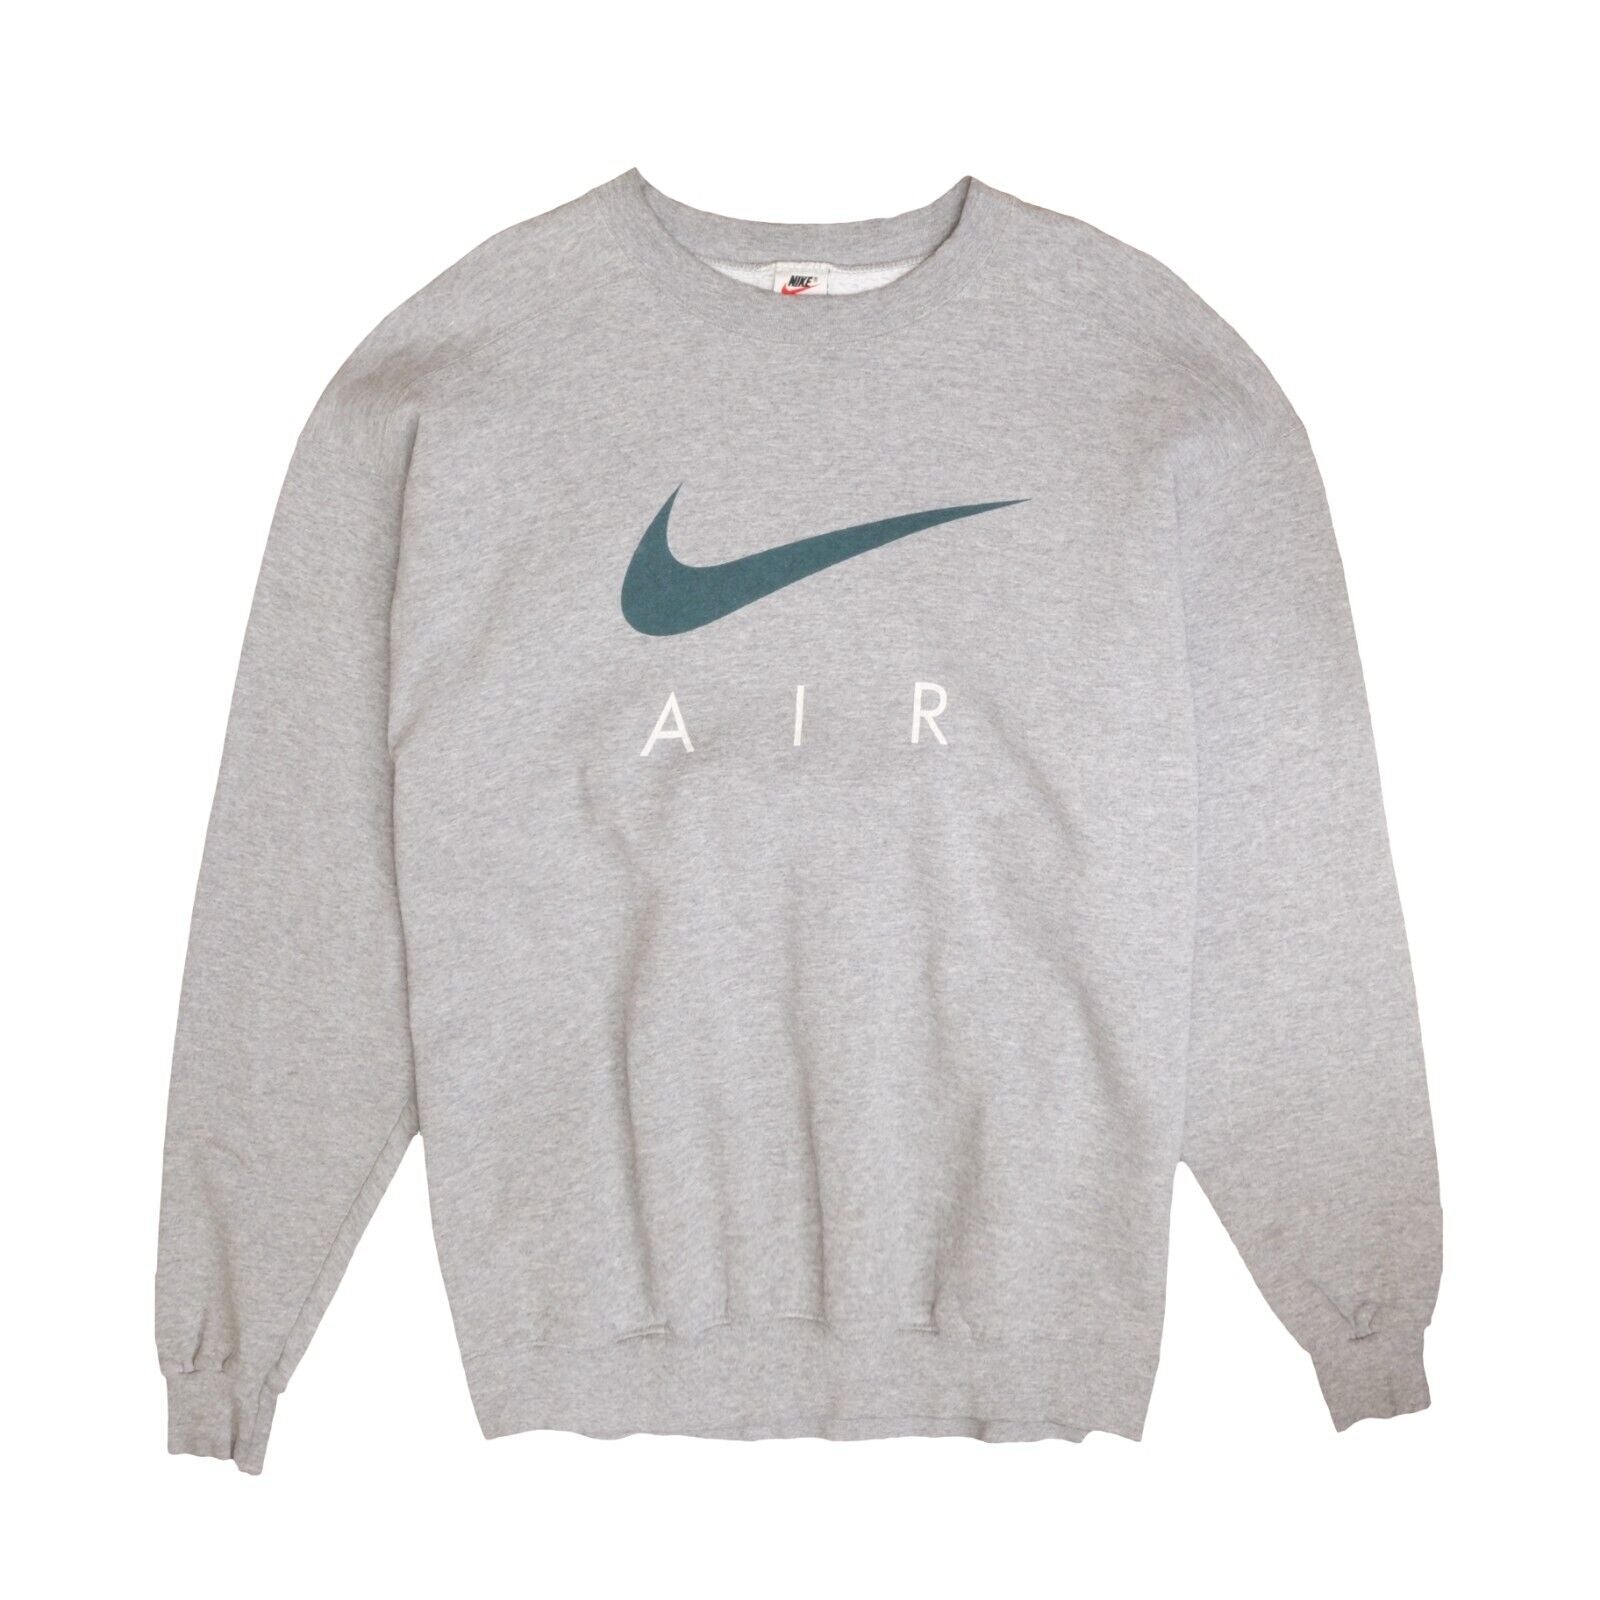 Vintage Nike Air Spell Out Sweatshirt Crewneck Size Large Gray 90s